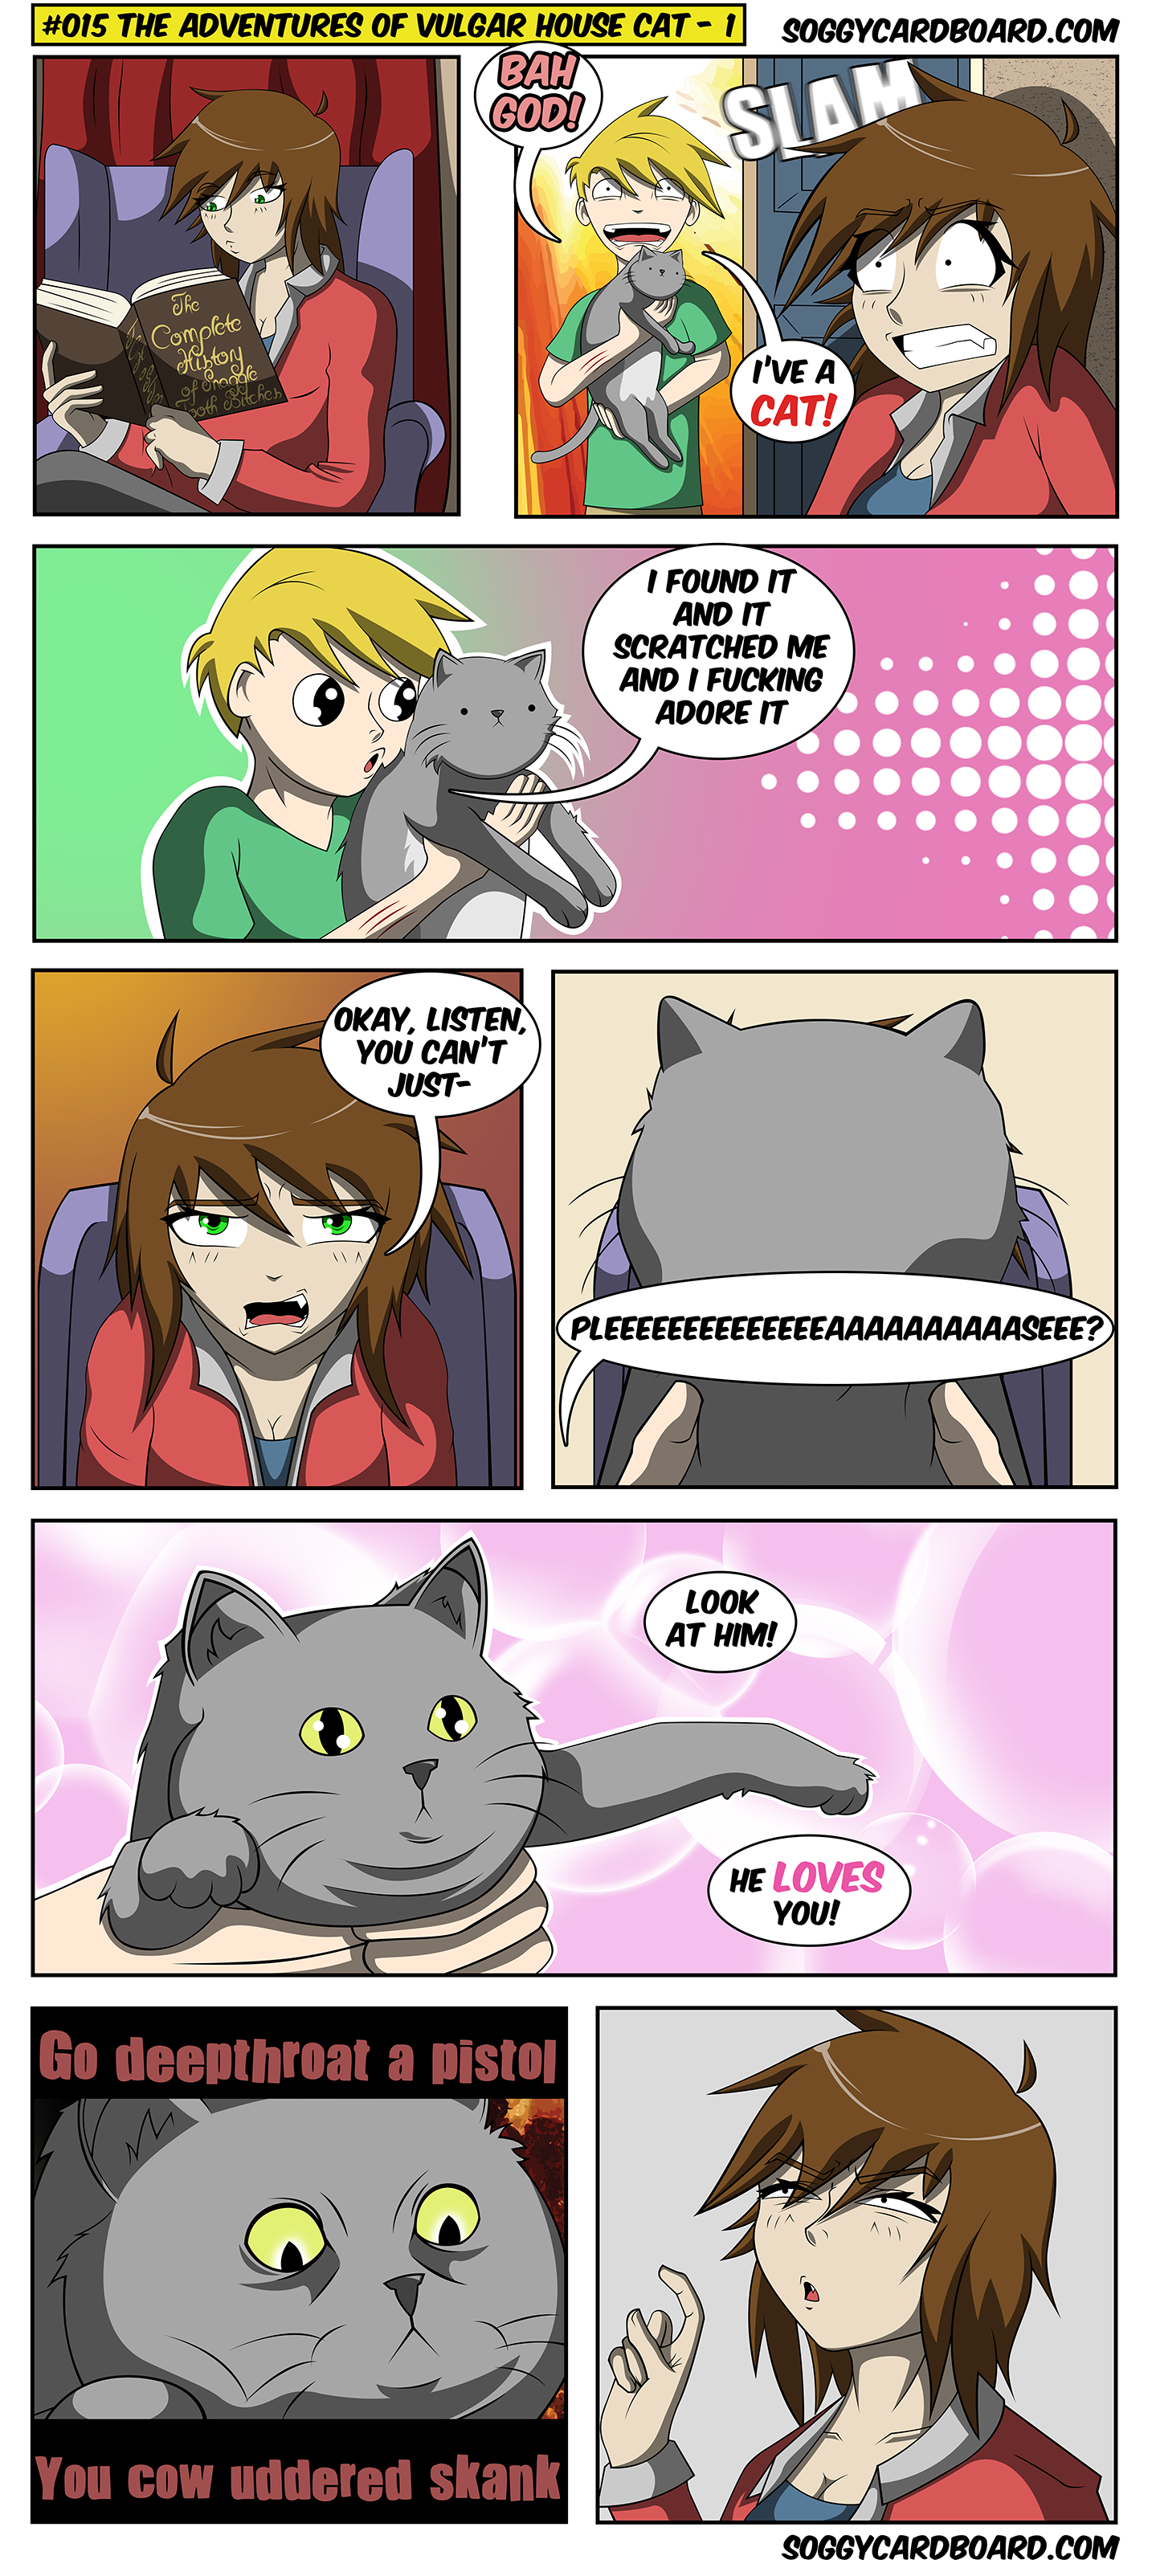 Shortly after this comic she took that cats advice and had a wonderful time.